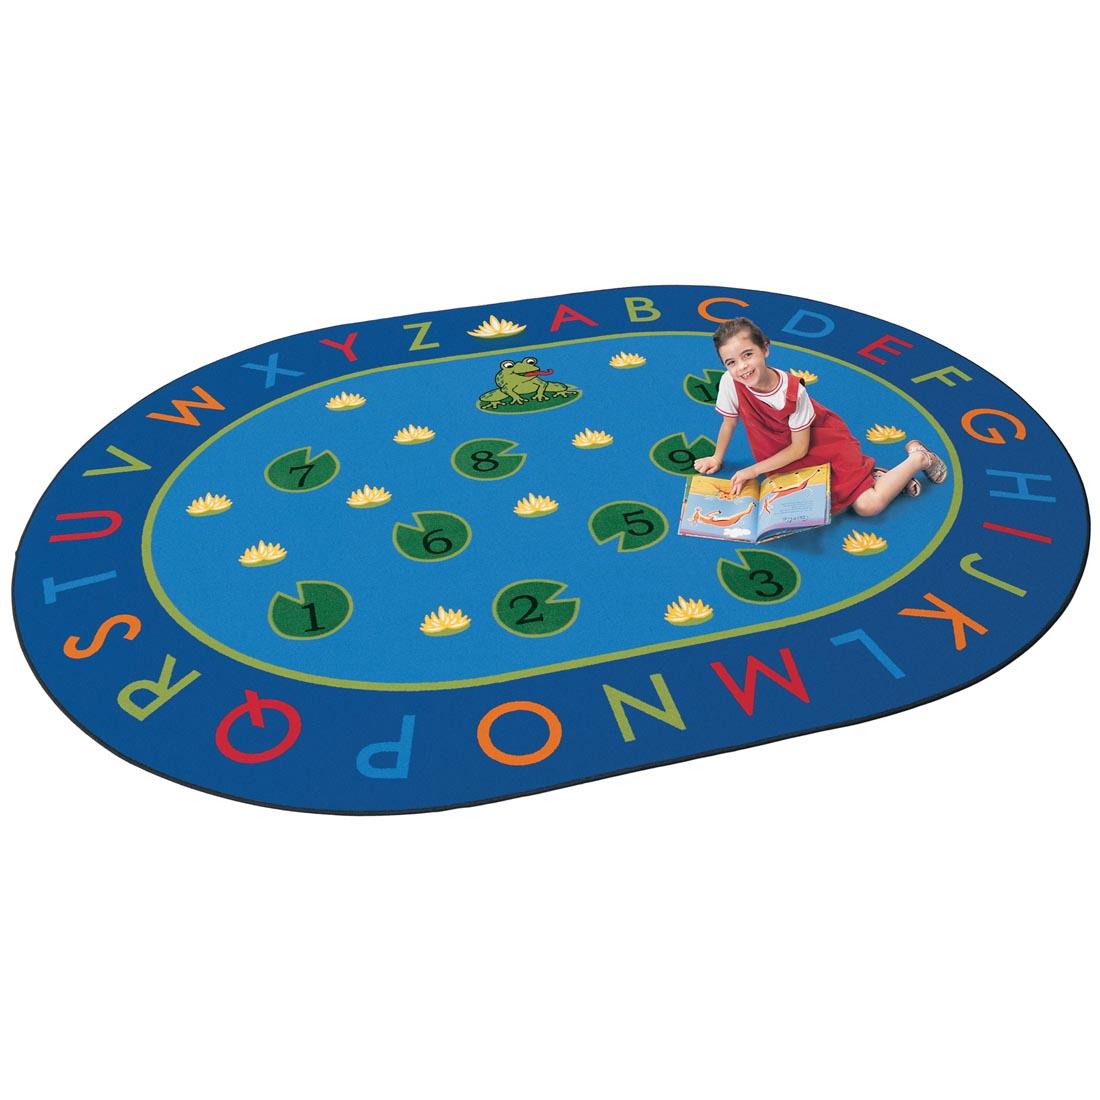 Child with a book sitting on the Frog-Themed Hip Hop to the Top Oval Rug by Carpets For Kids